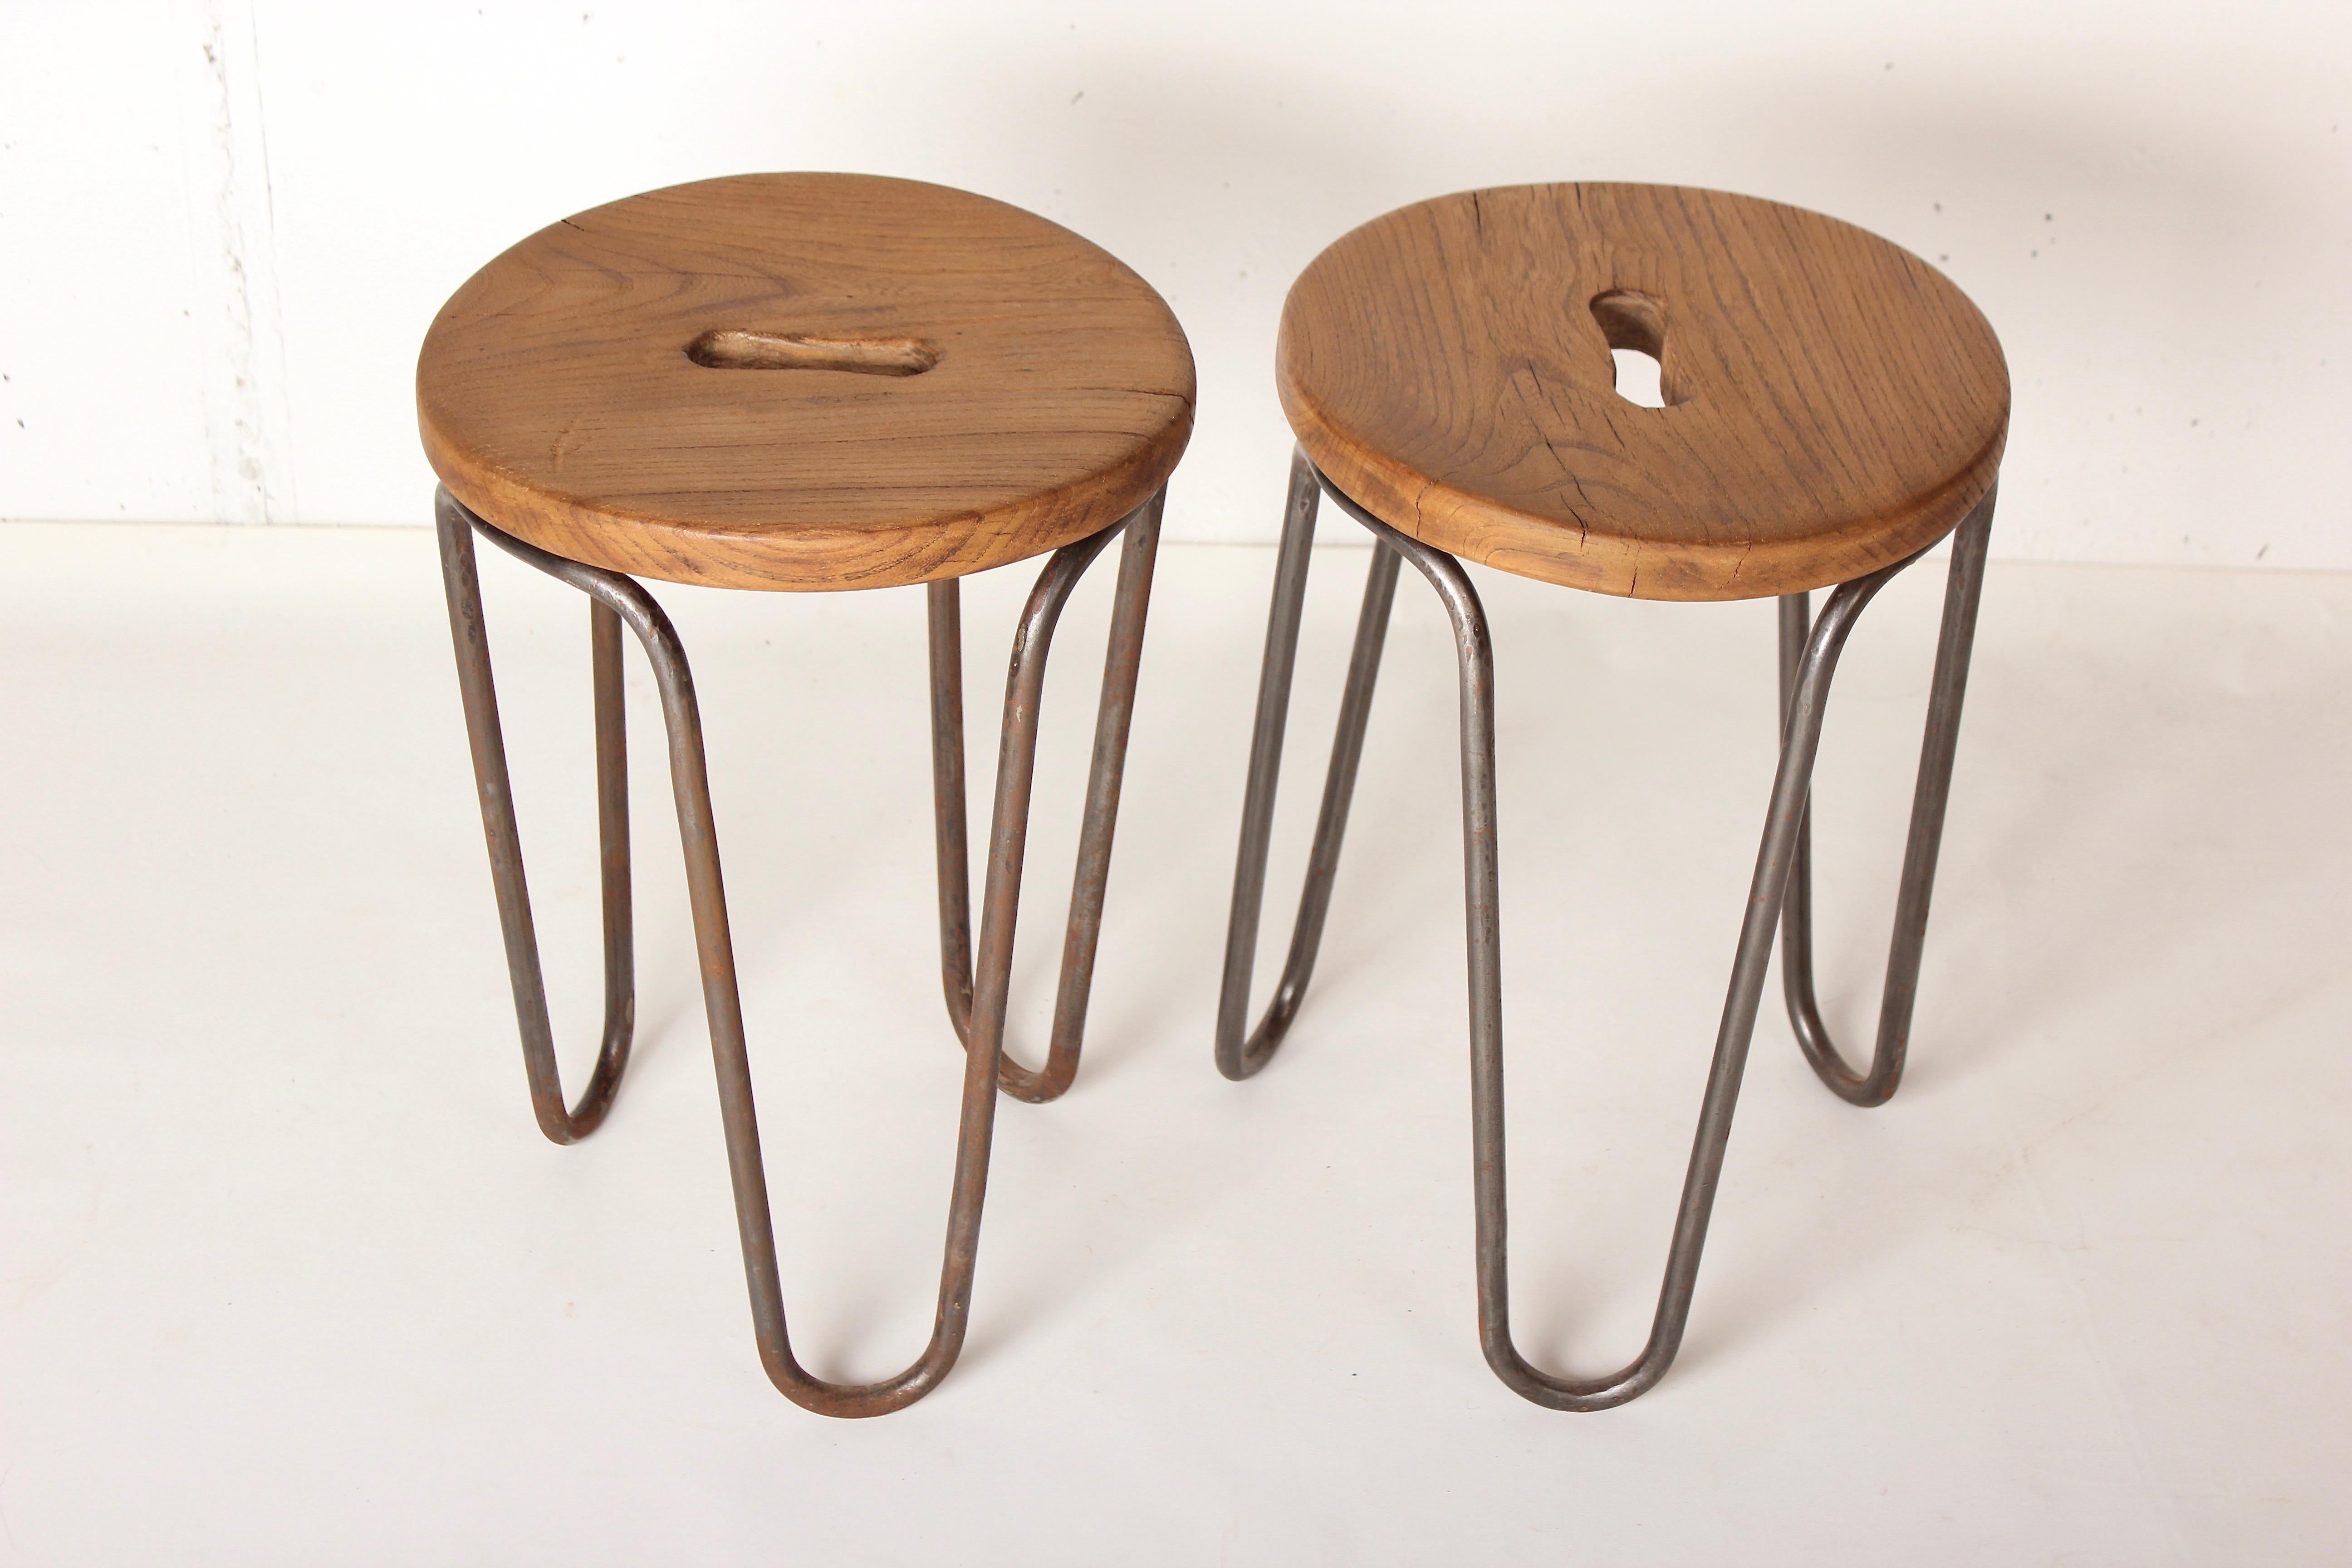 French Stool by Cesar Janello for Raoul Guys Aa Éditions, 1947